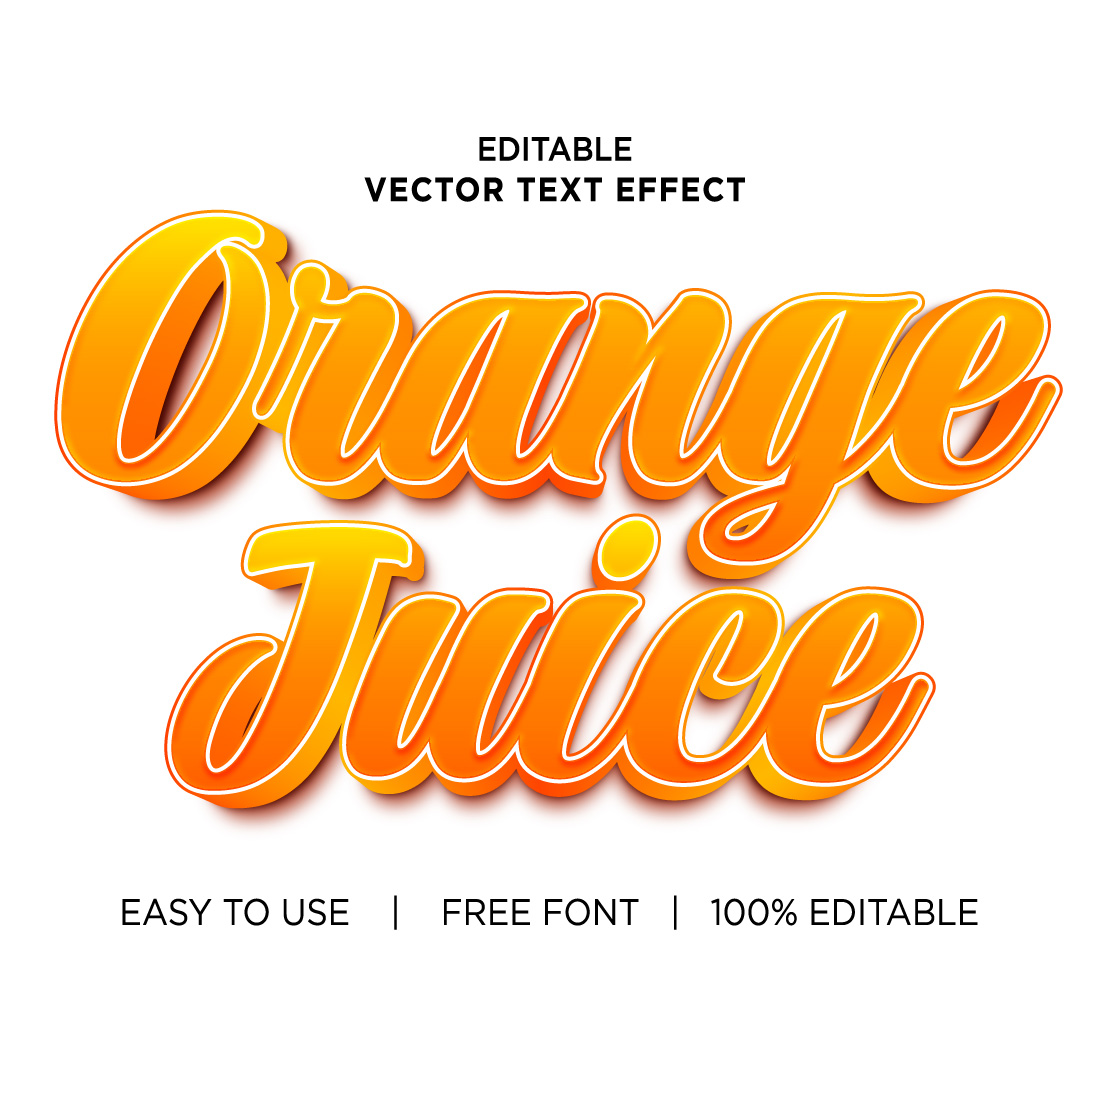 Orange juicy 3d text effects vector illustrations New Text style eps files Editable text effect vector preview image.